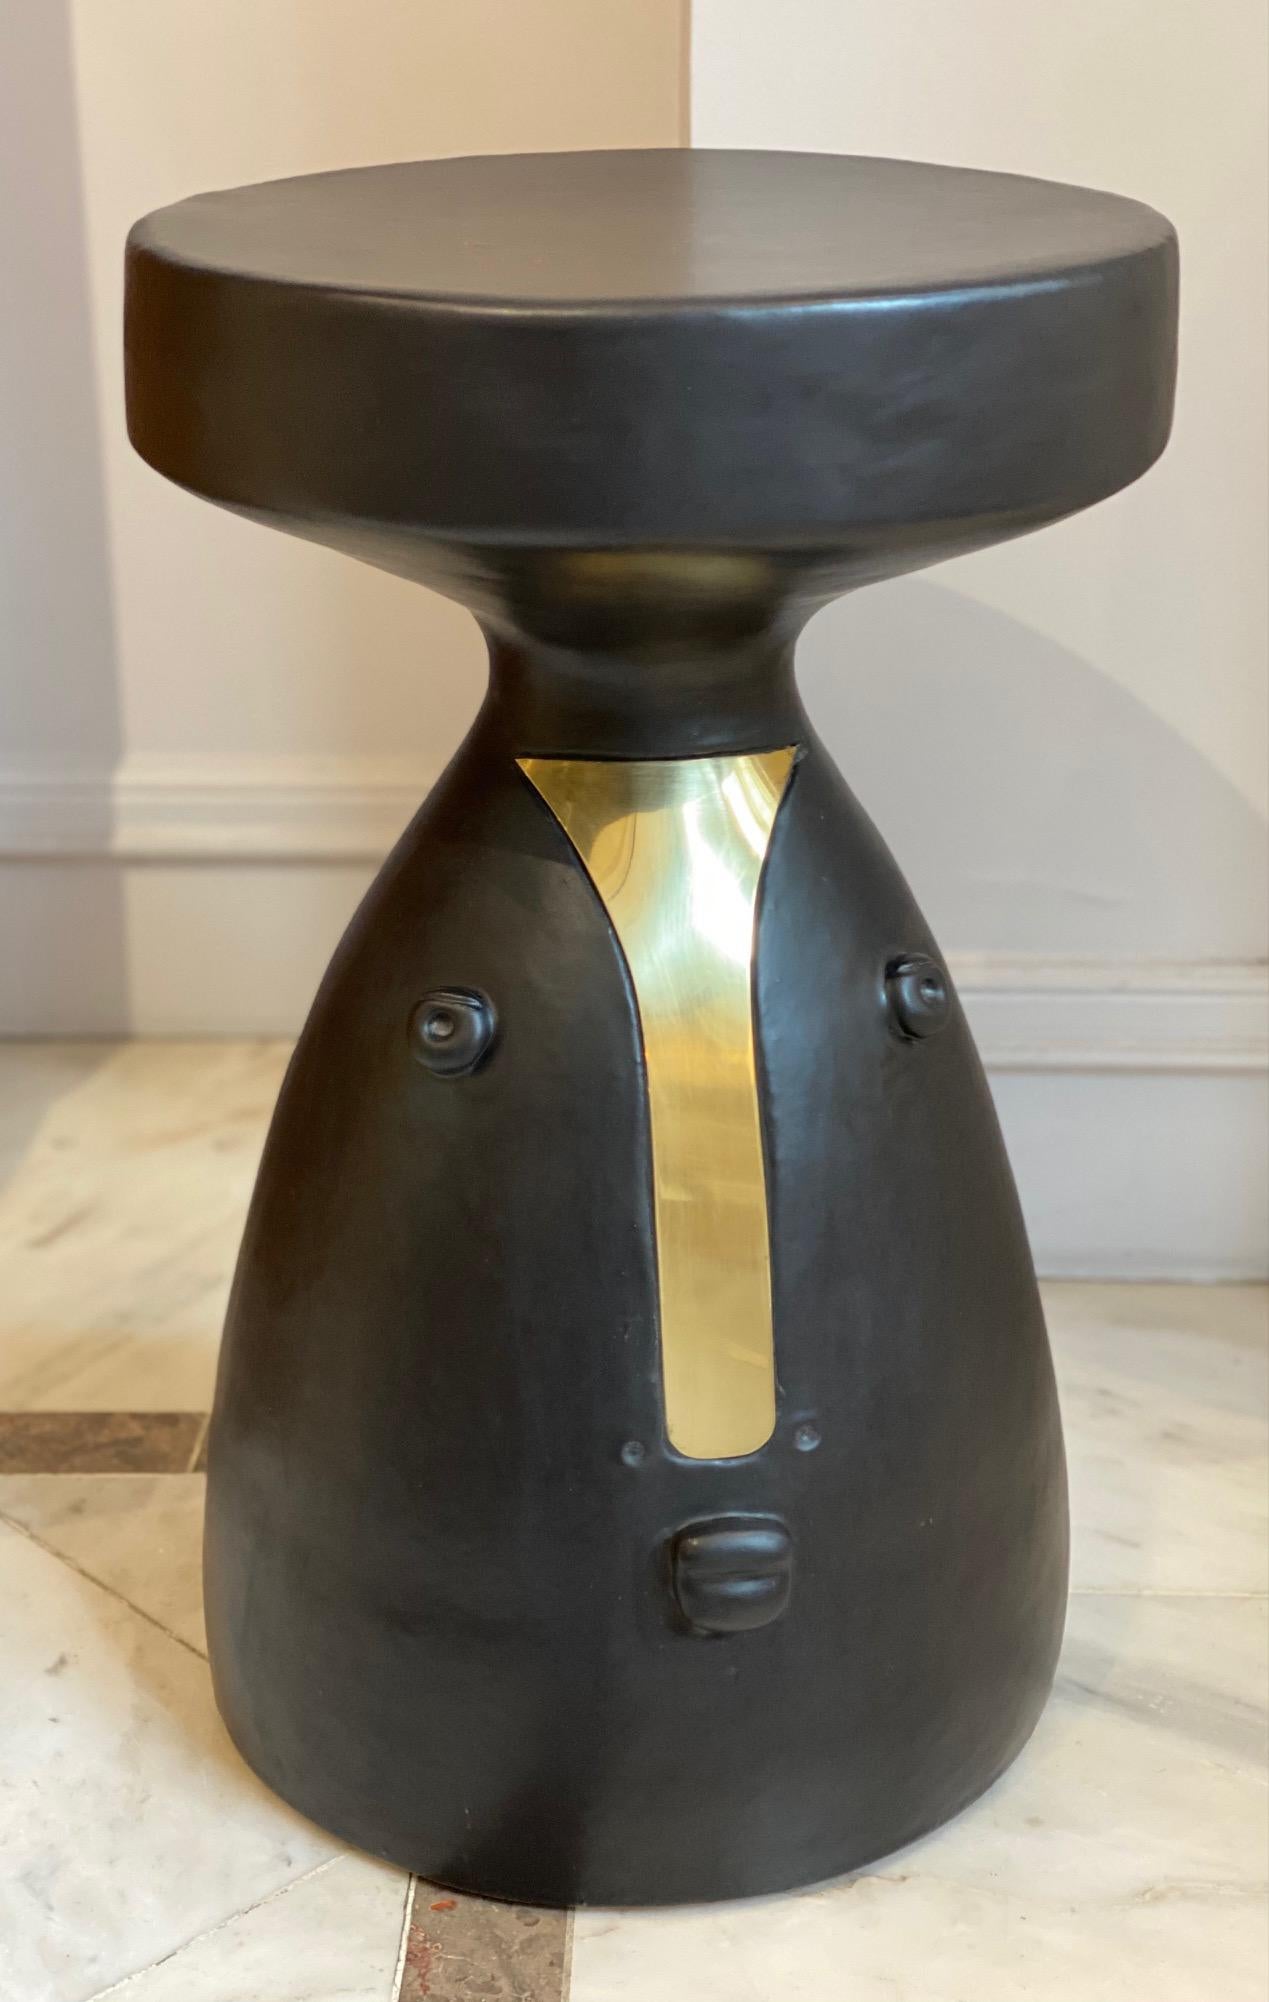 Earthenware black glazed stool (or side table) with stylized face and brass noze 2022.
Unique hand-sculpted piece signed by the French ceramicists DALO.